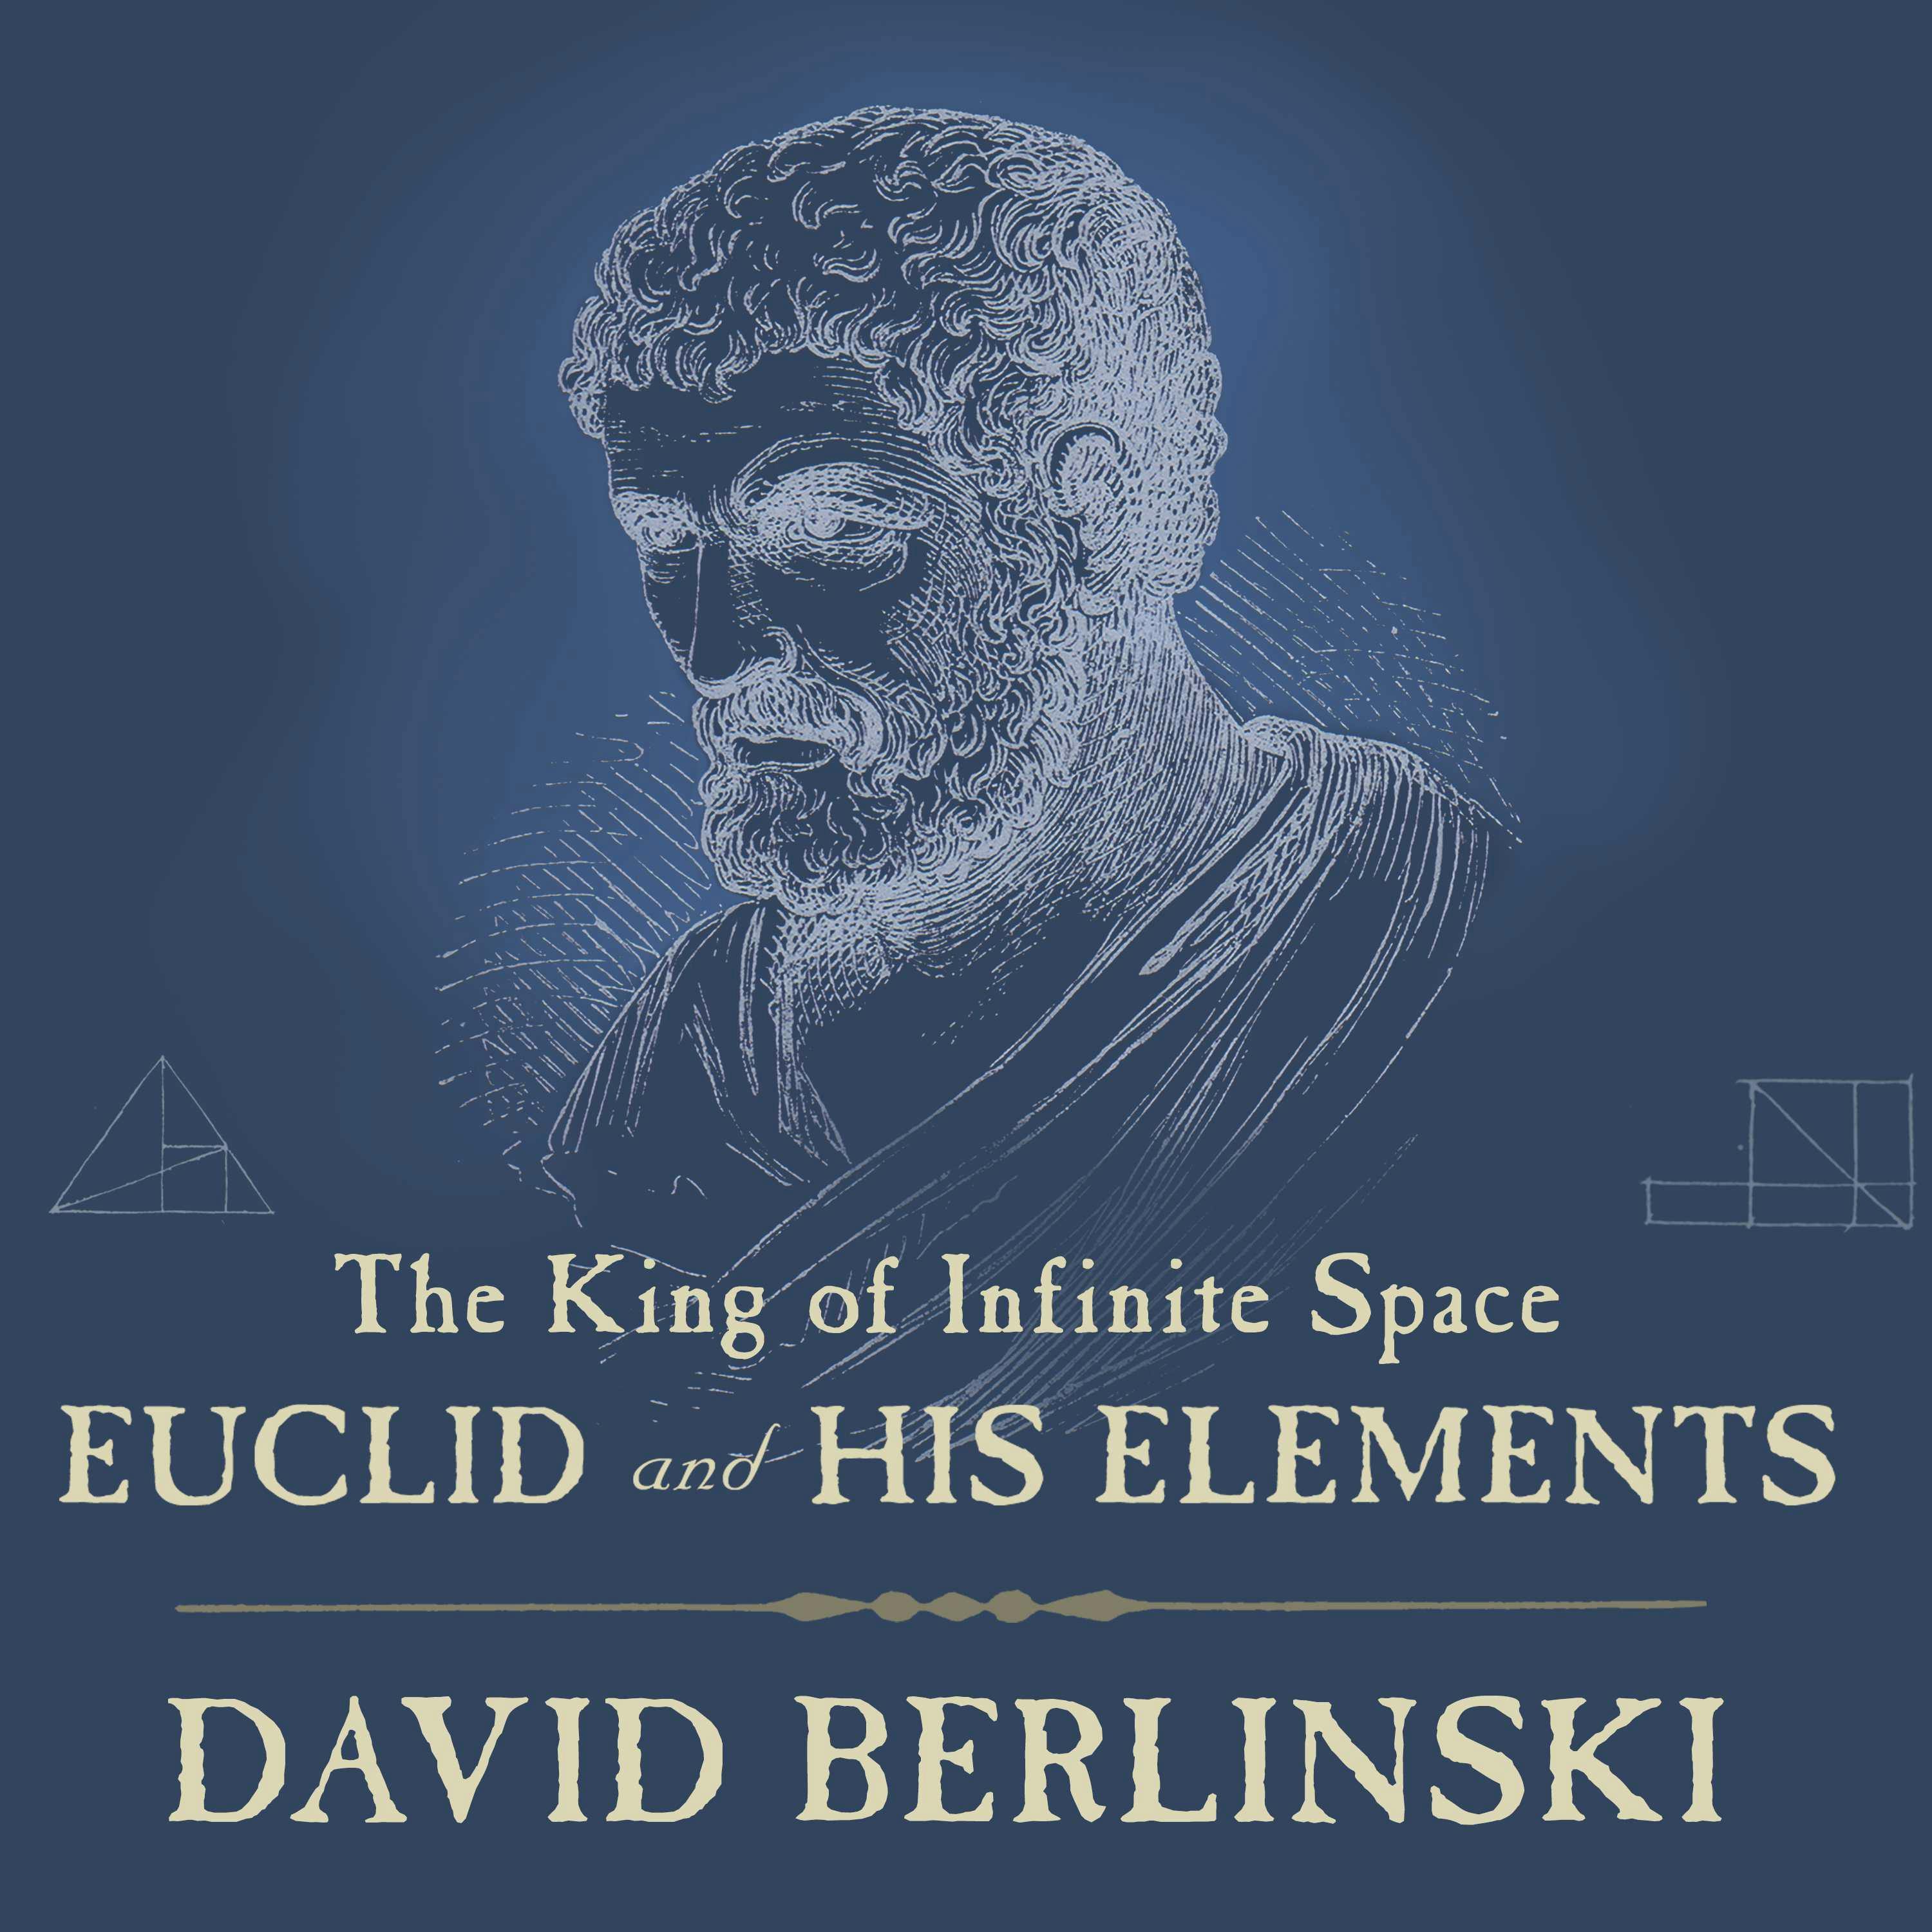 The King of Infinite Space: Euclid and His Elements - David Berlinski